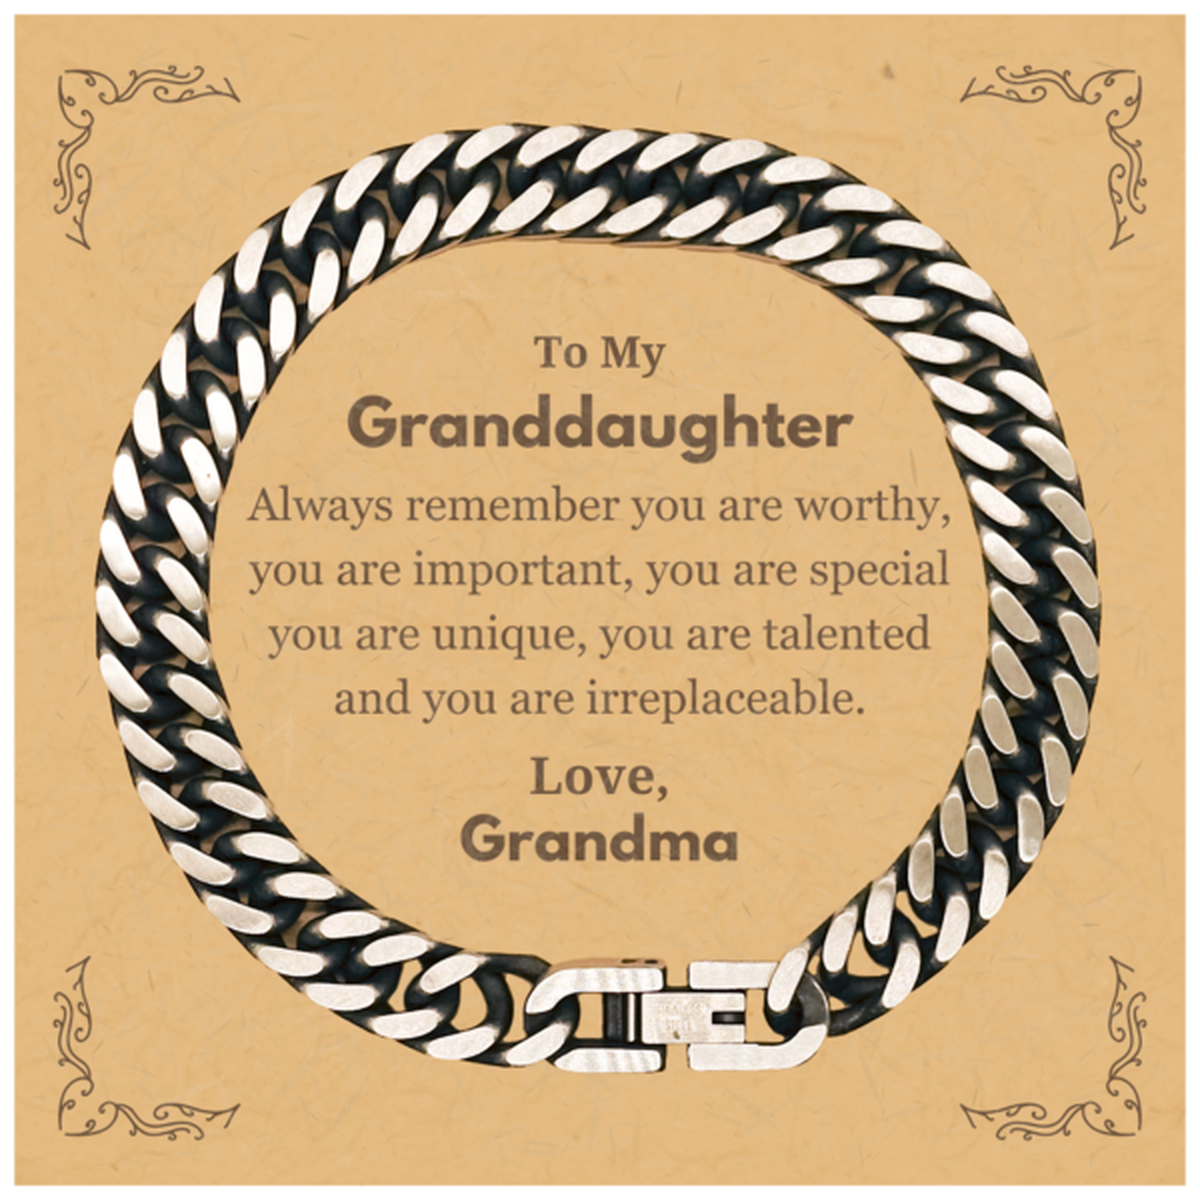 Granddaughter Birthday Gifts from Grandma, Inspirational Cuban Link Chain Bracelet for Granddaughter Christmas Graduation Gifts for Granddaughter Always remember you are worthy, you are important. Love, Grandma